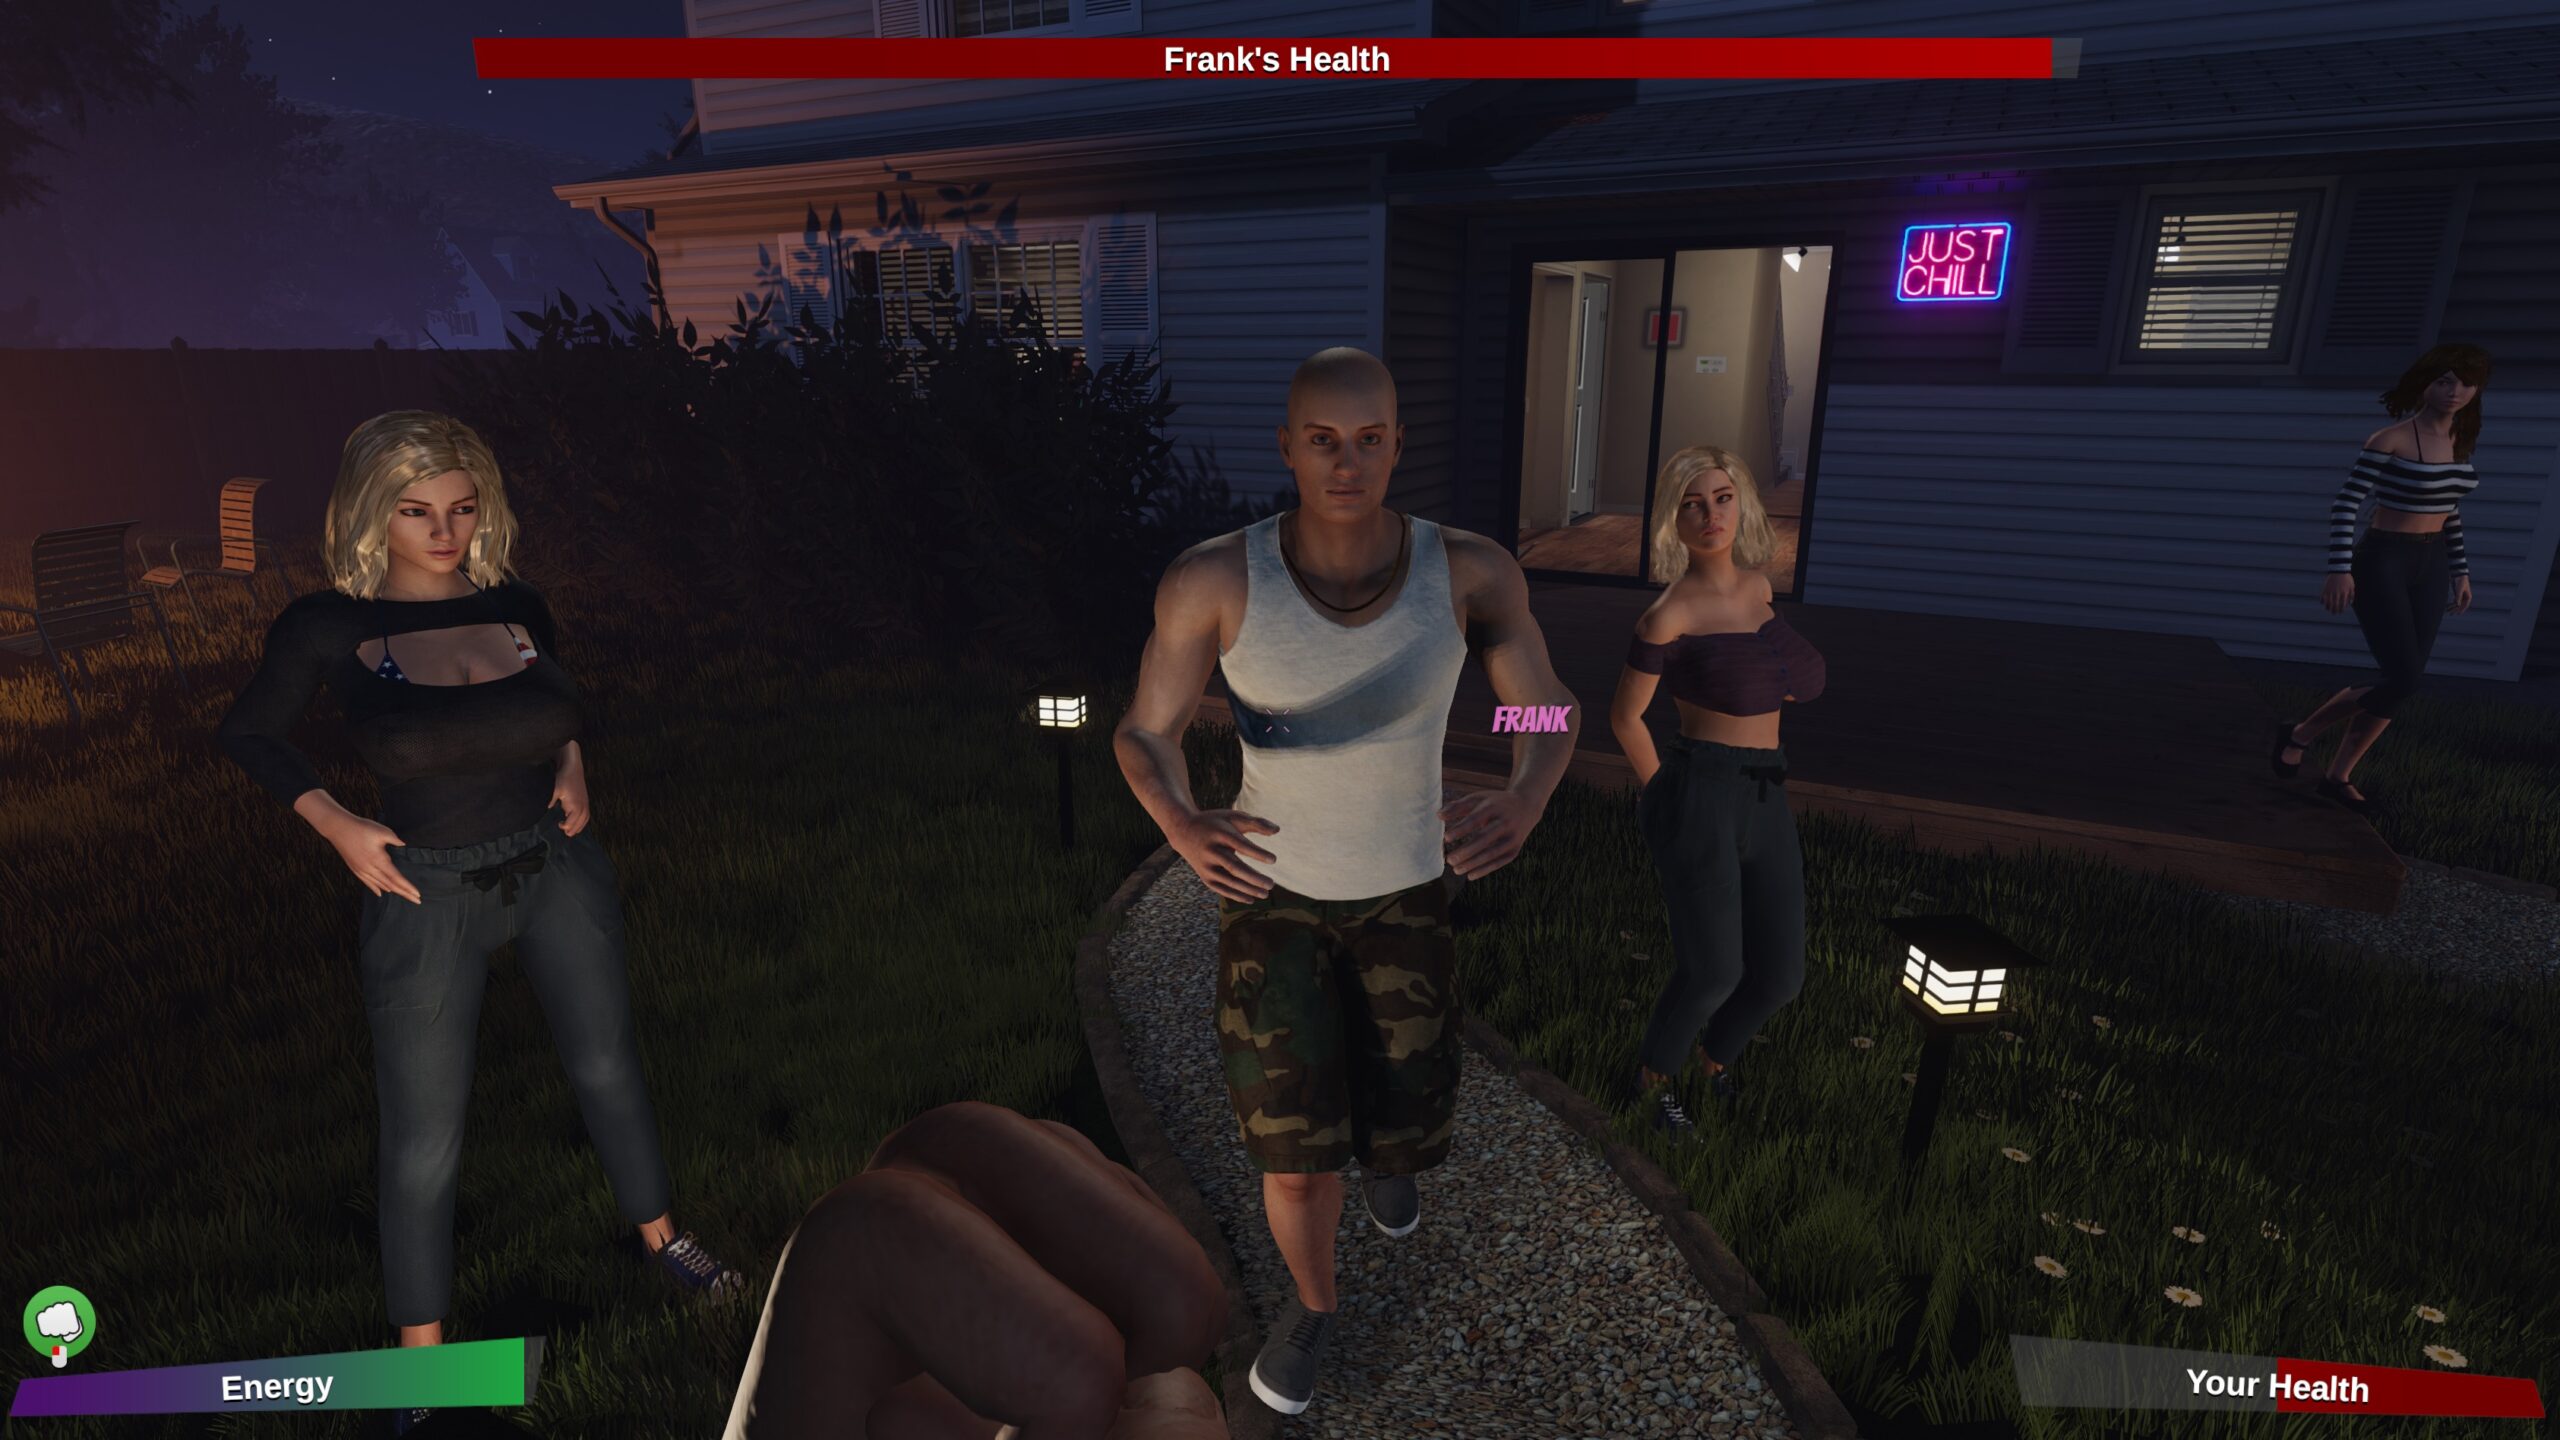 house party game free download pc full version